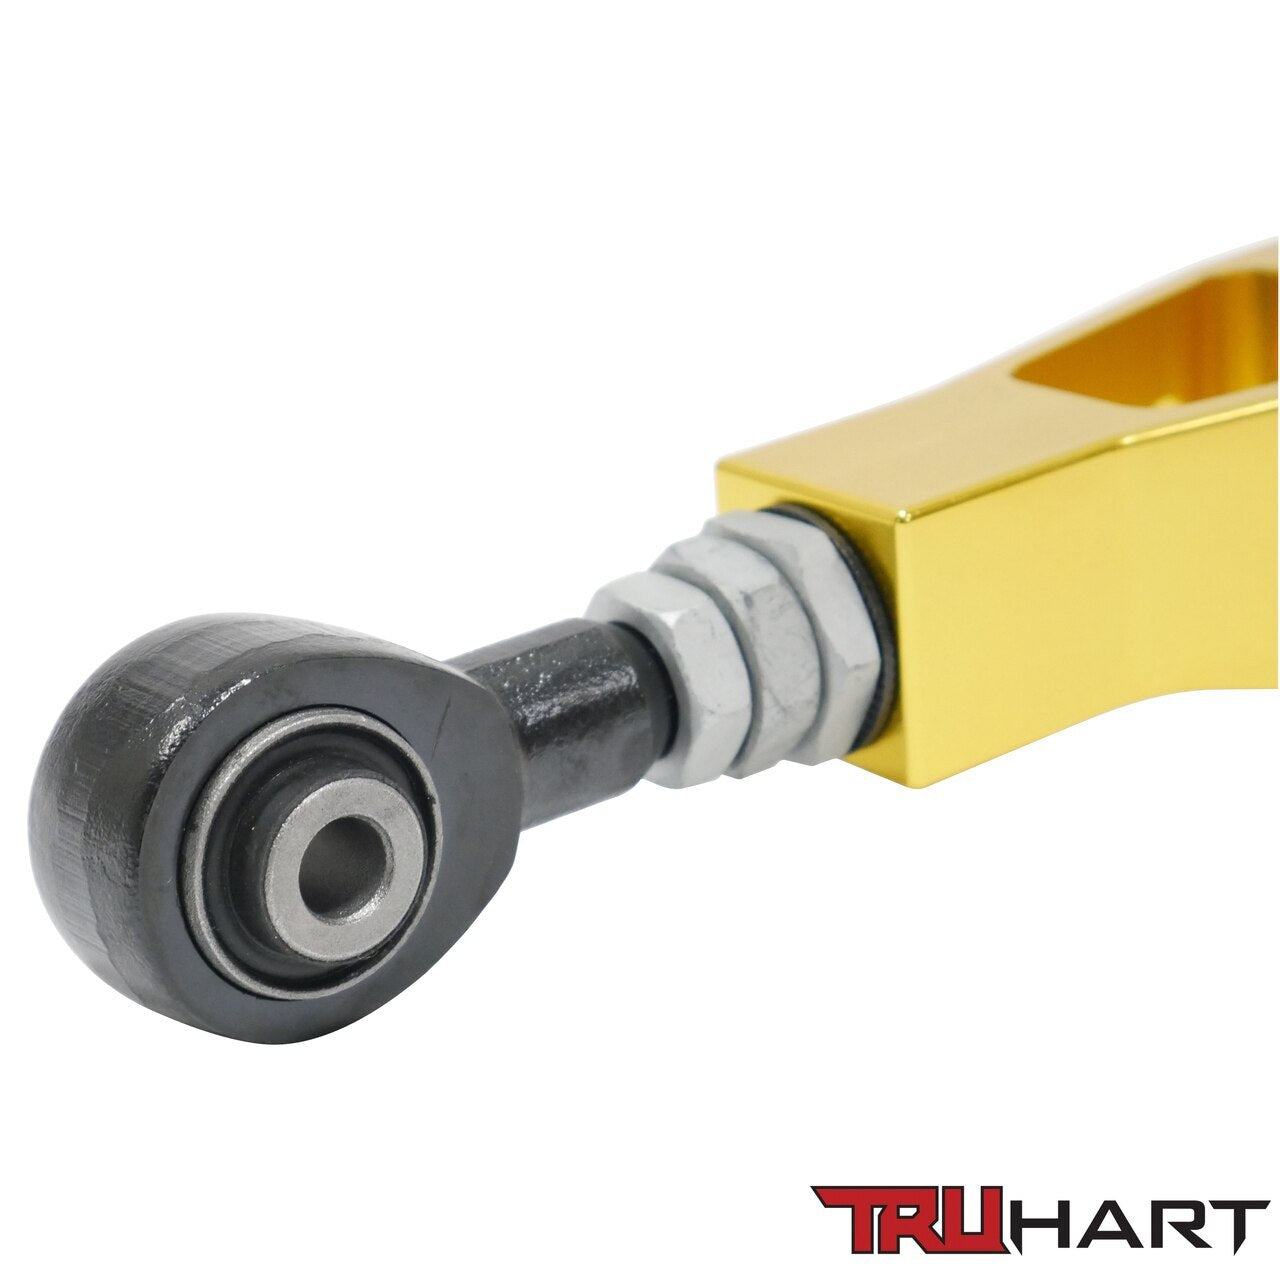 TruHart - Rear Lower Control Arms - Adjustable - Anodized Gold - TH-S108-GO